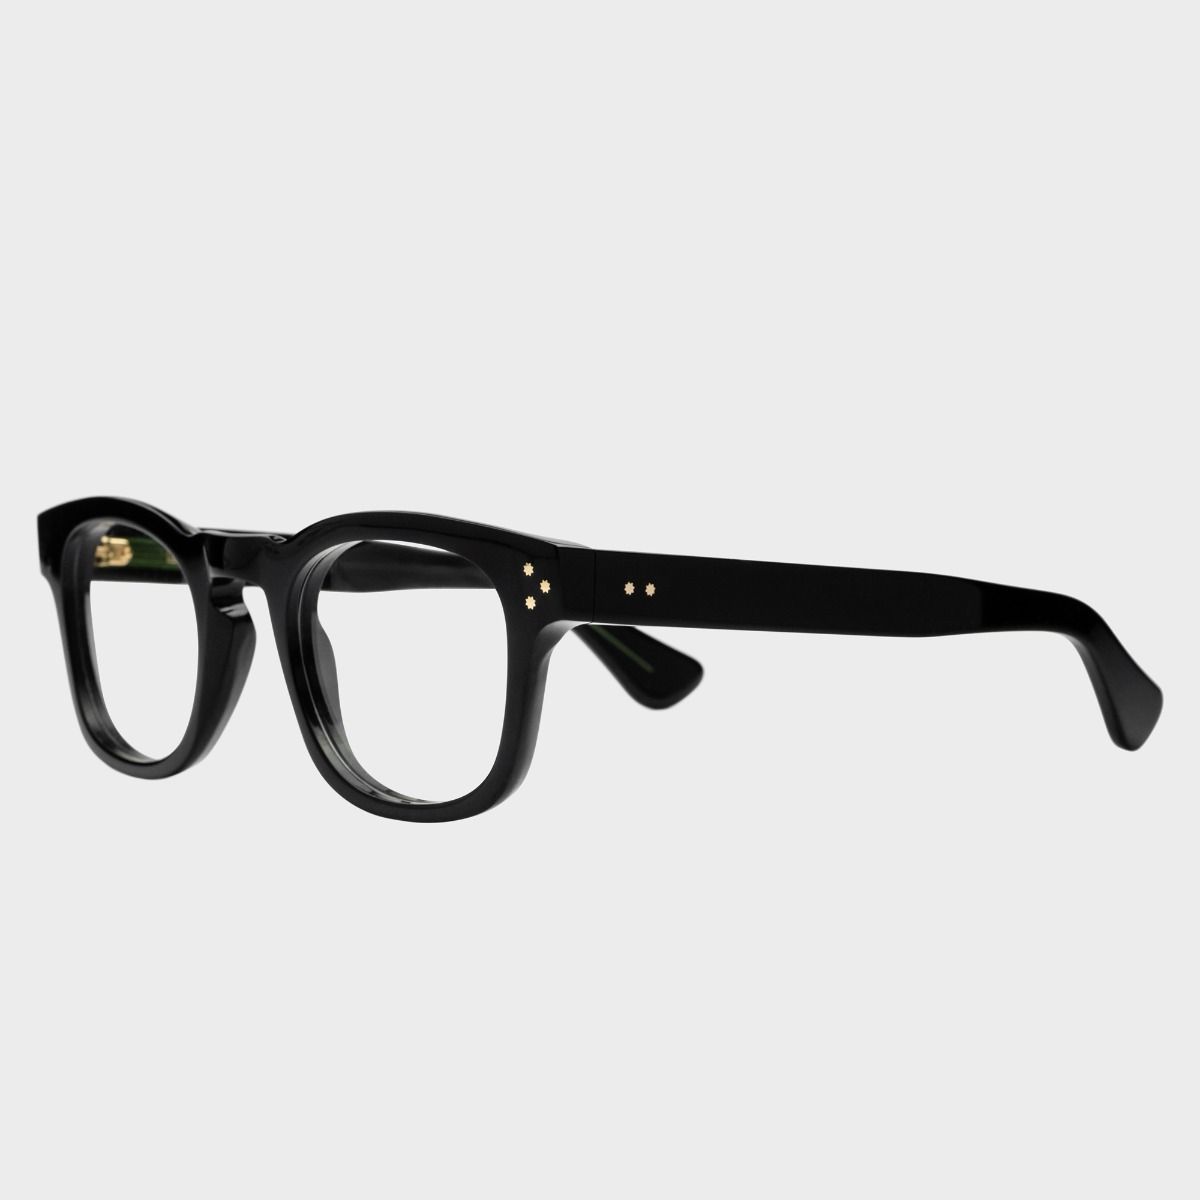 Cutler and Gross, 1389 Optical Square Glasses - Black